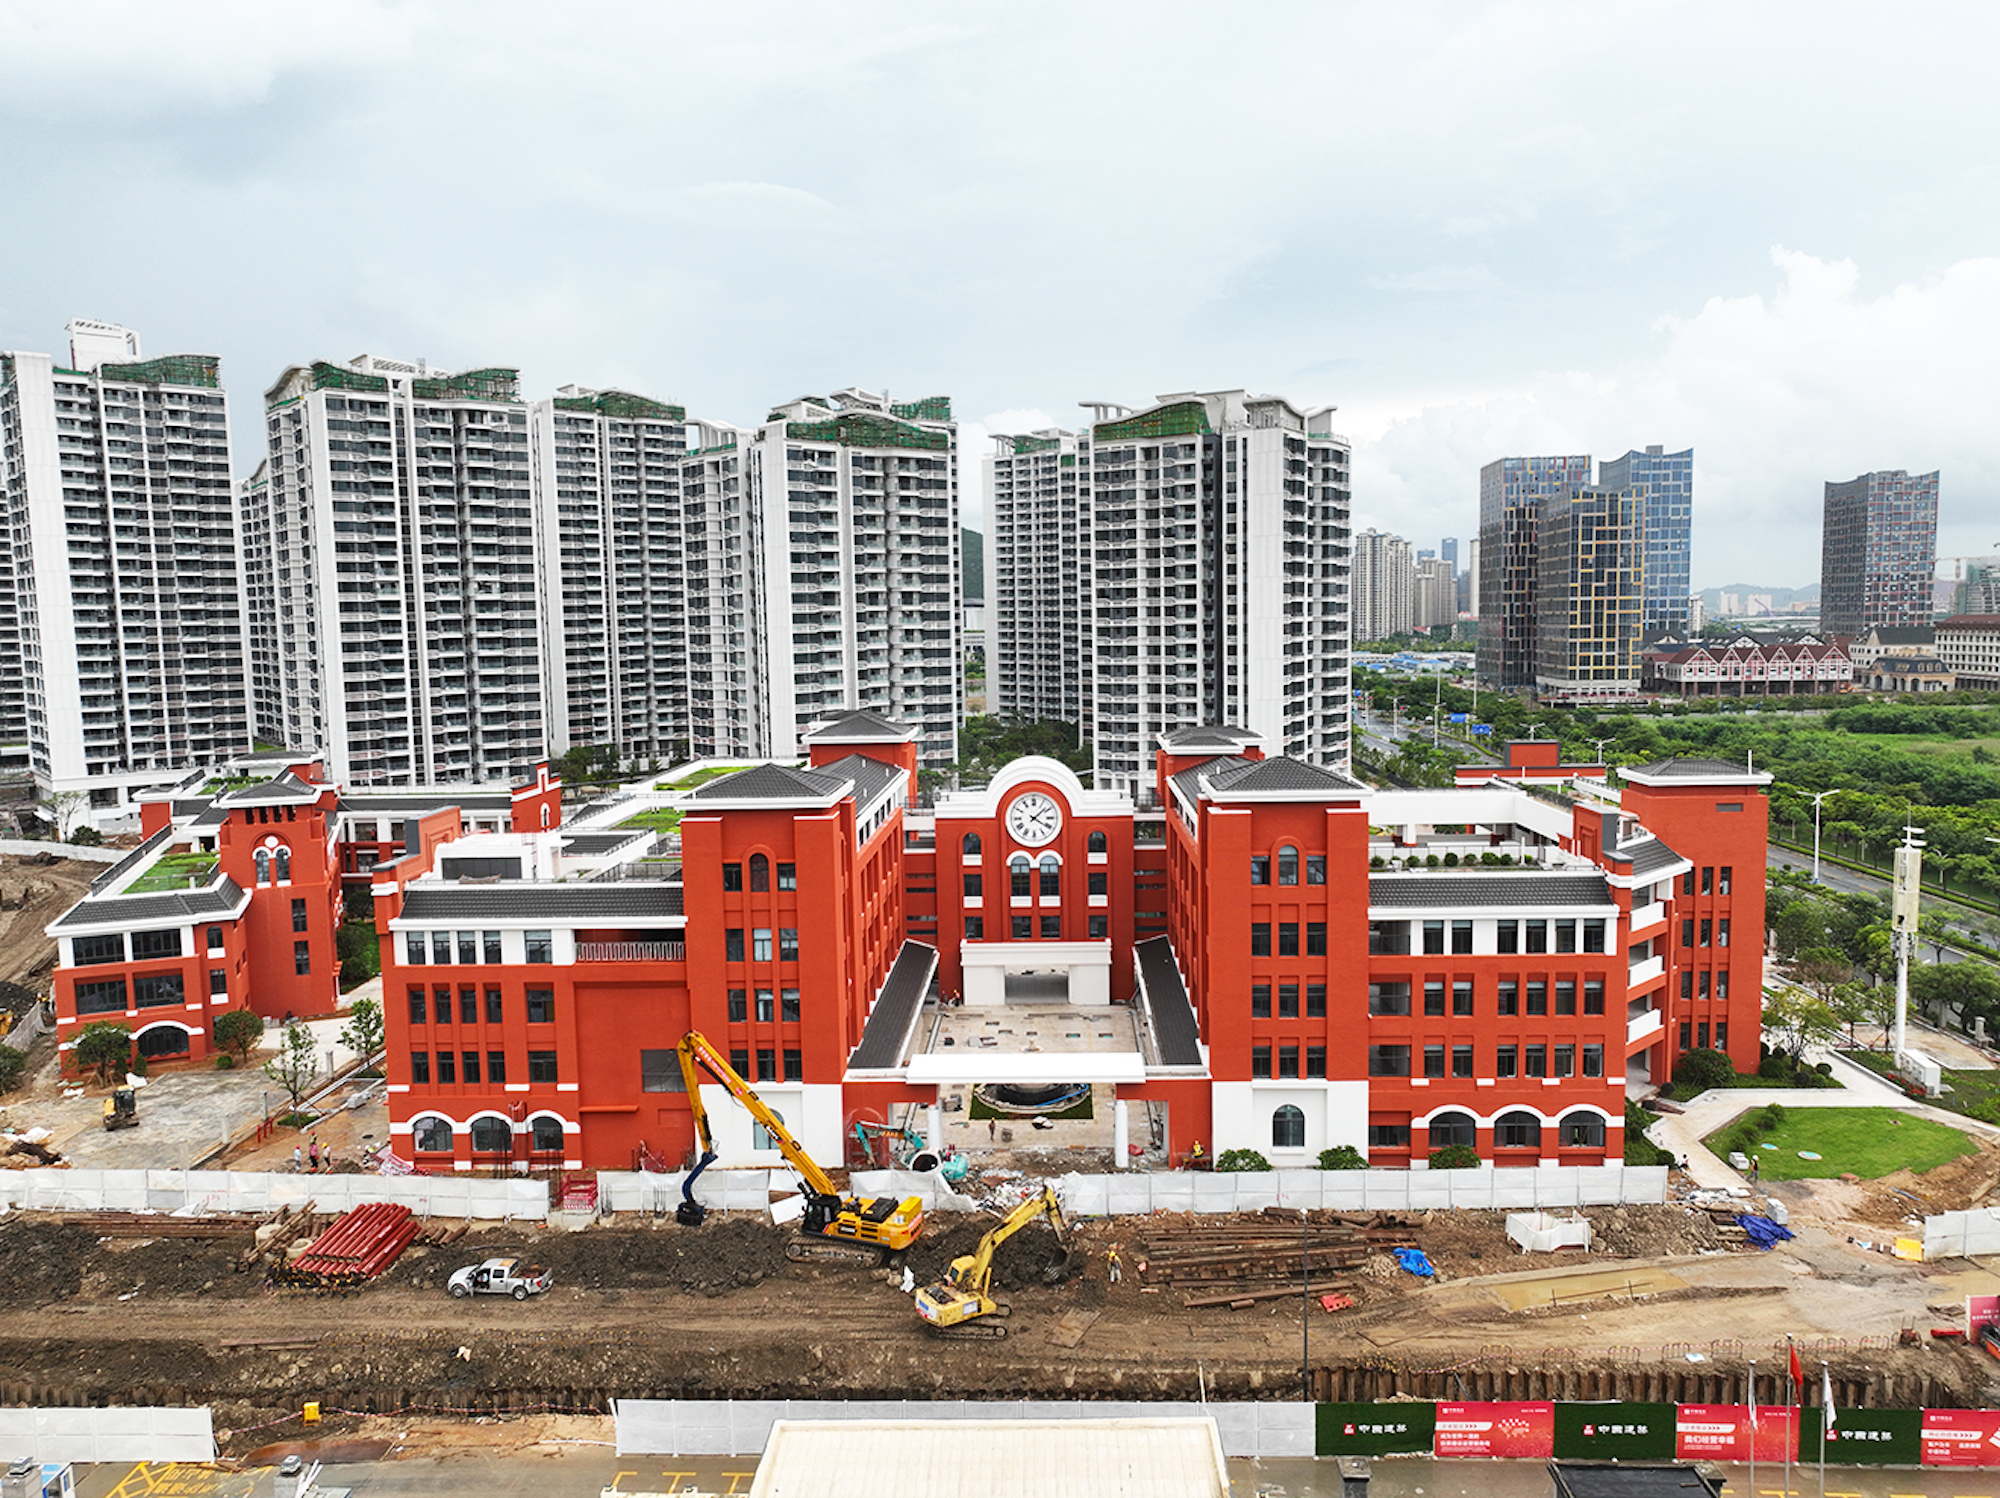 Favourable loan terms for Macau New Neighbourhood units are being negotiated